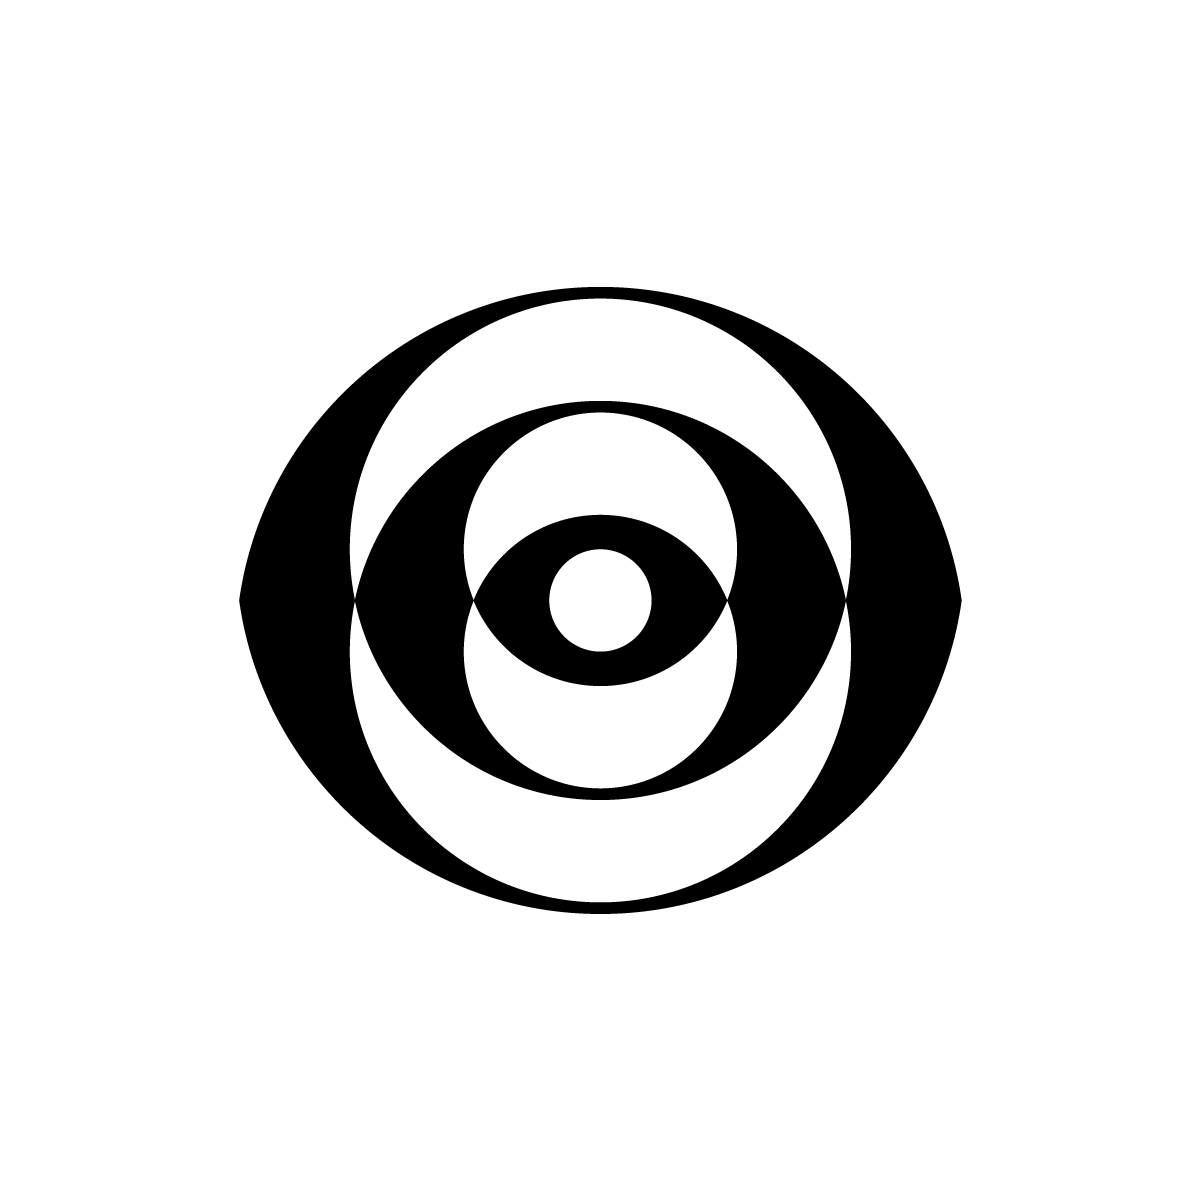  Concentric Circles Logo featuring overlapping segments and a central dot in black, symbolizing clarity and focus